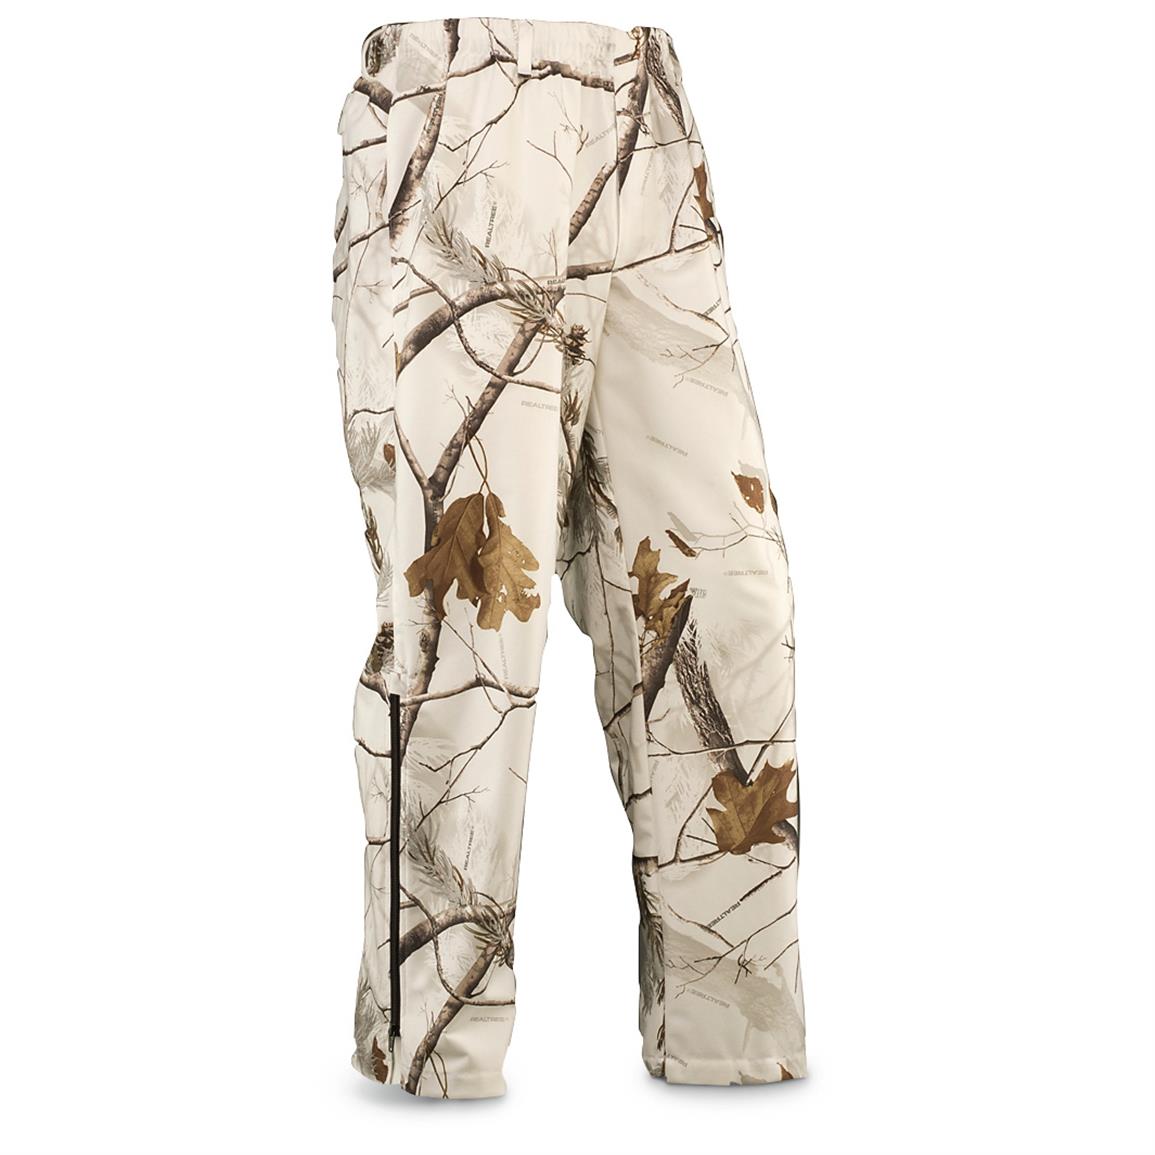 Browning Snow Camo Pants - 597488, Camo Pants at Sportsman's Guide